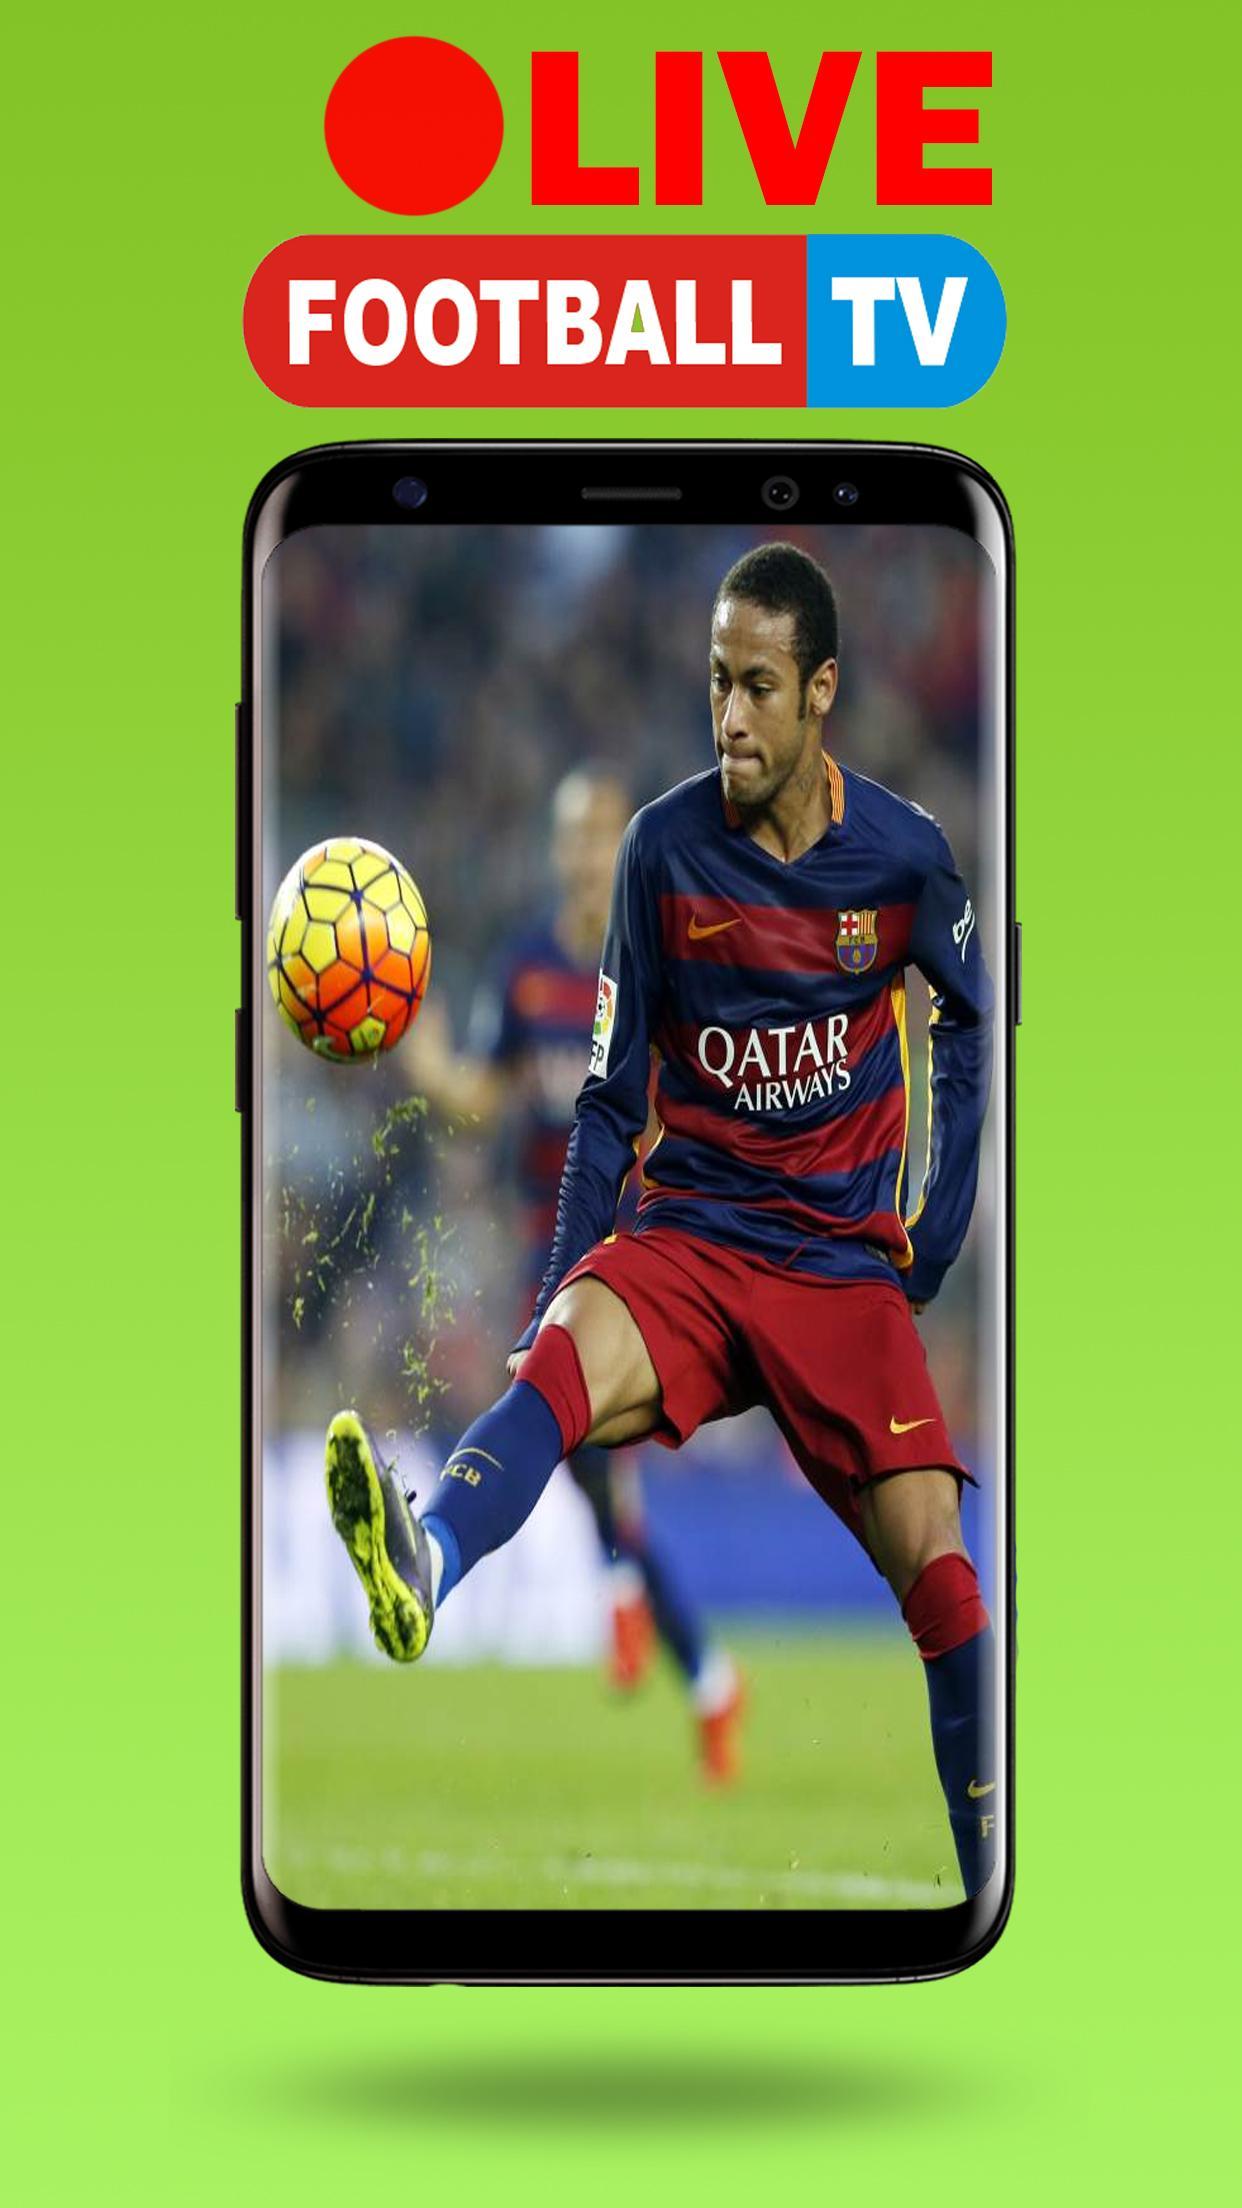 Live Football tv for Android - APK Download